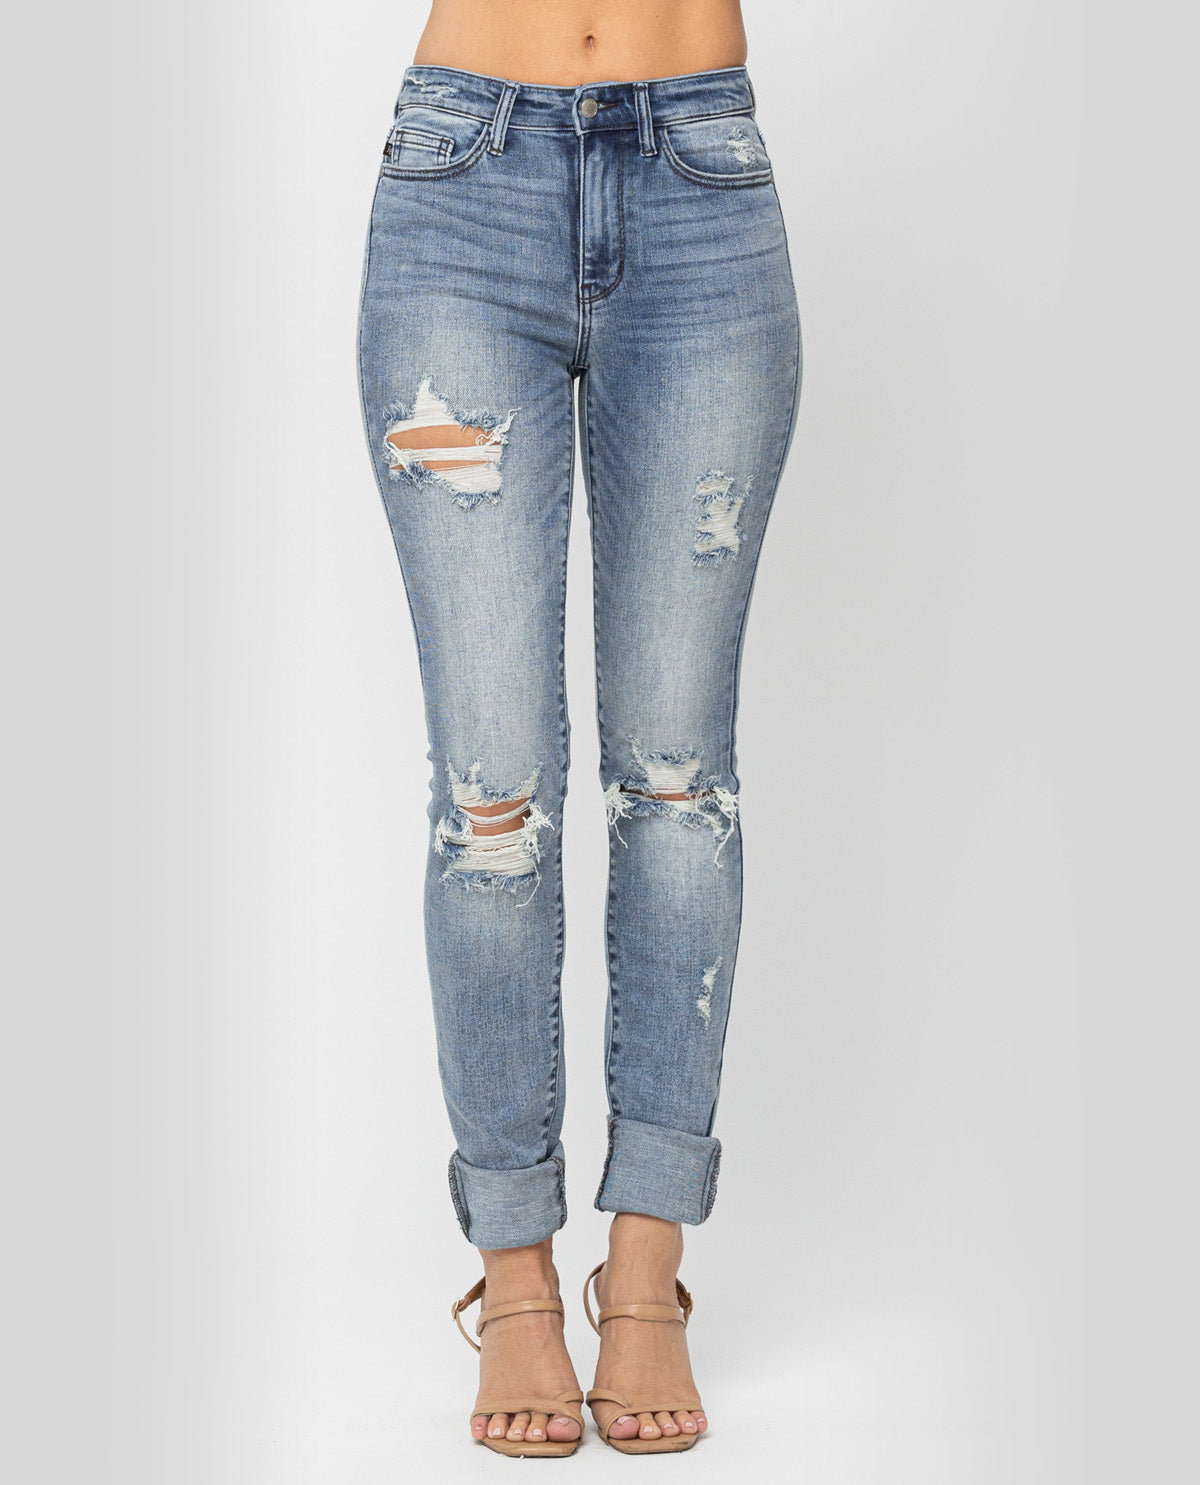 Judy Blue High Rise Skinny Fit Destroyed Jeans – Hamrick's Shop